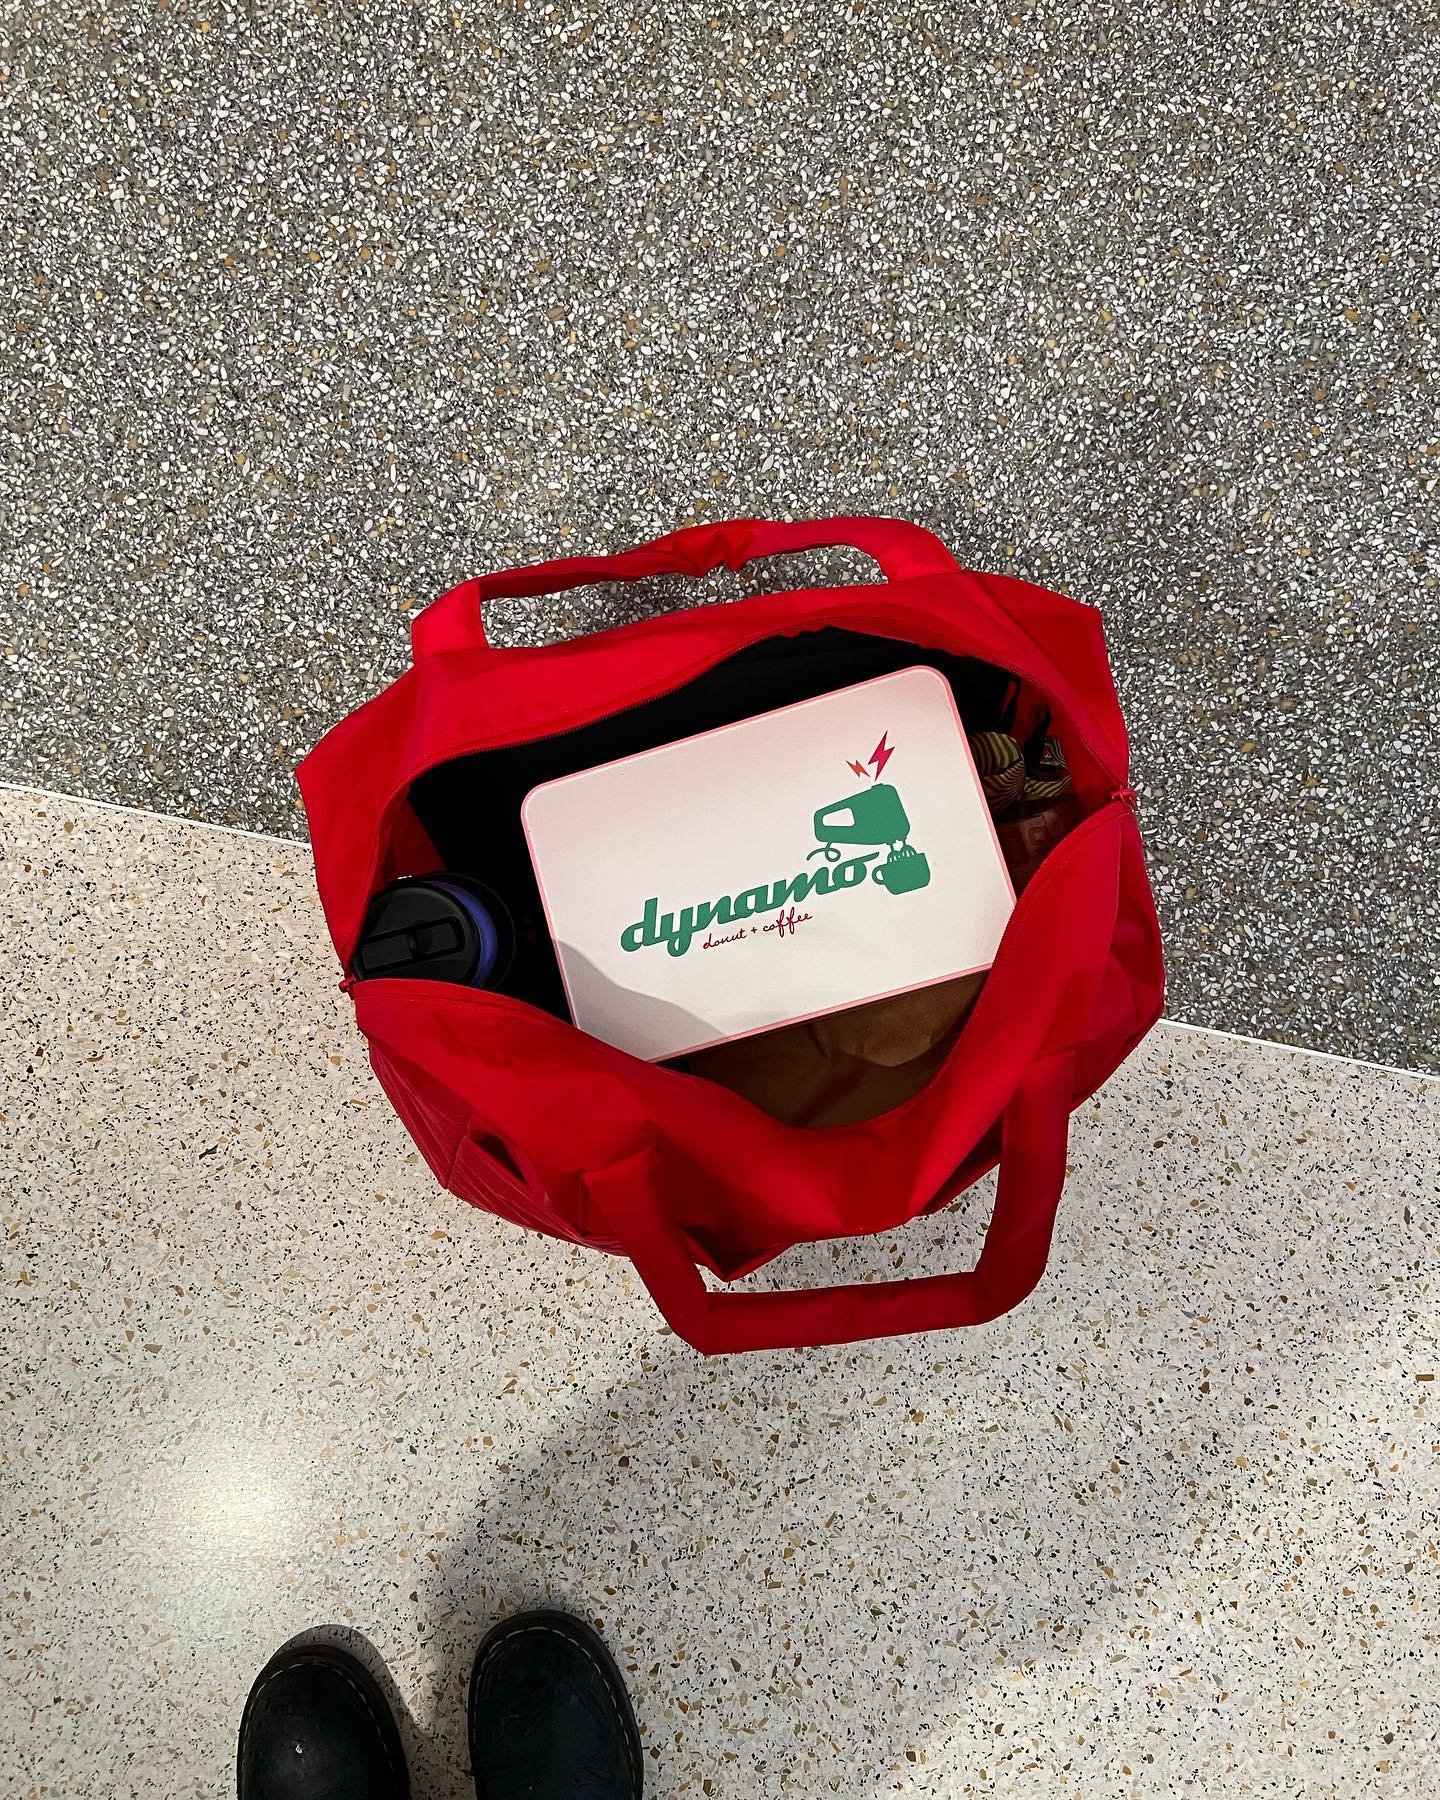 When traveling with donuts, you gotta do it in style 😎

We just got a fresh re-stock on our reusable donut boxes! These perfectly fit a 1/2 dozen donuts &amp; get you a discount on donuts when you bring your box to the shop.